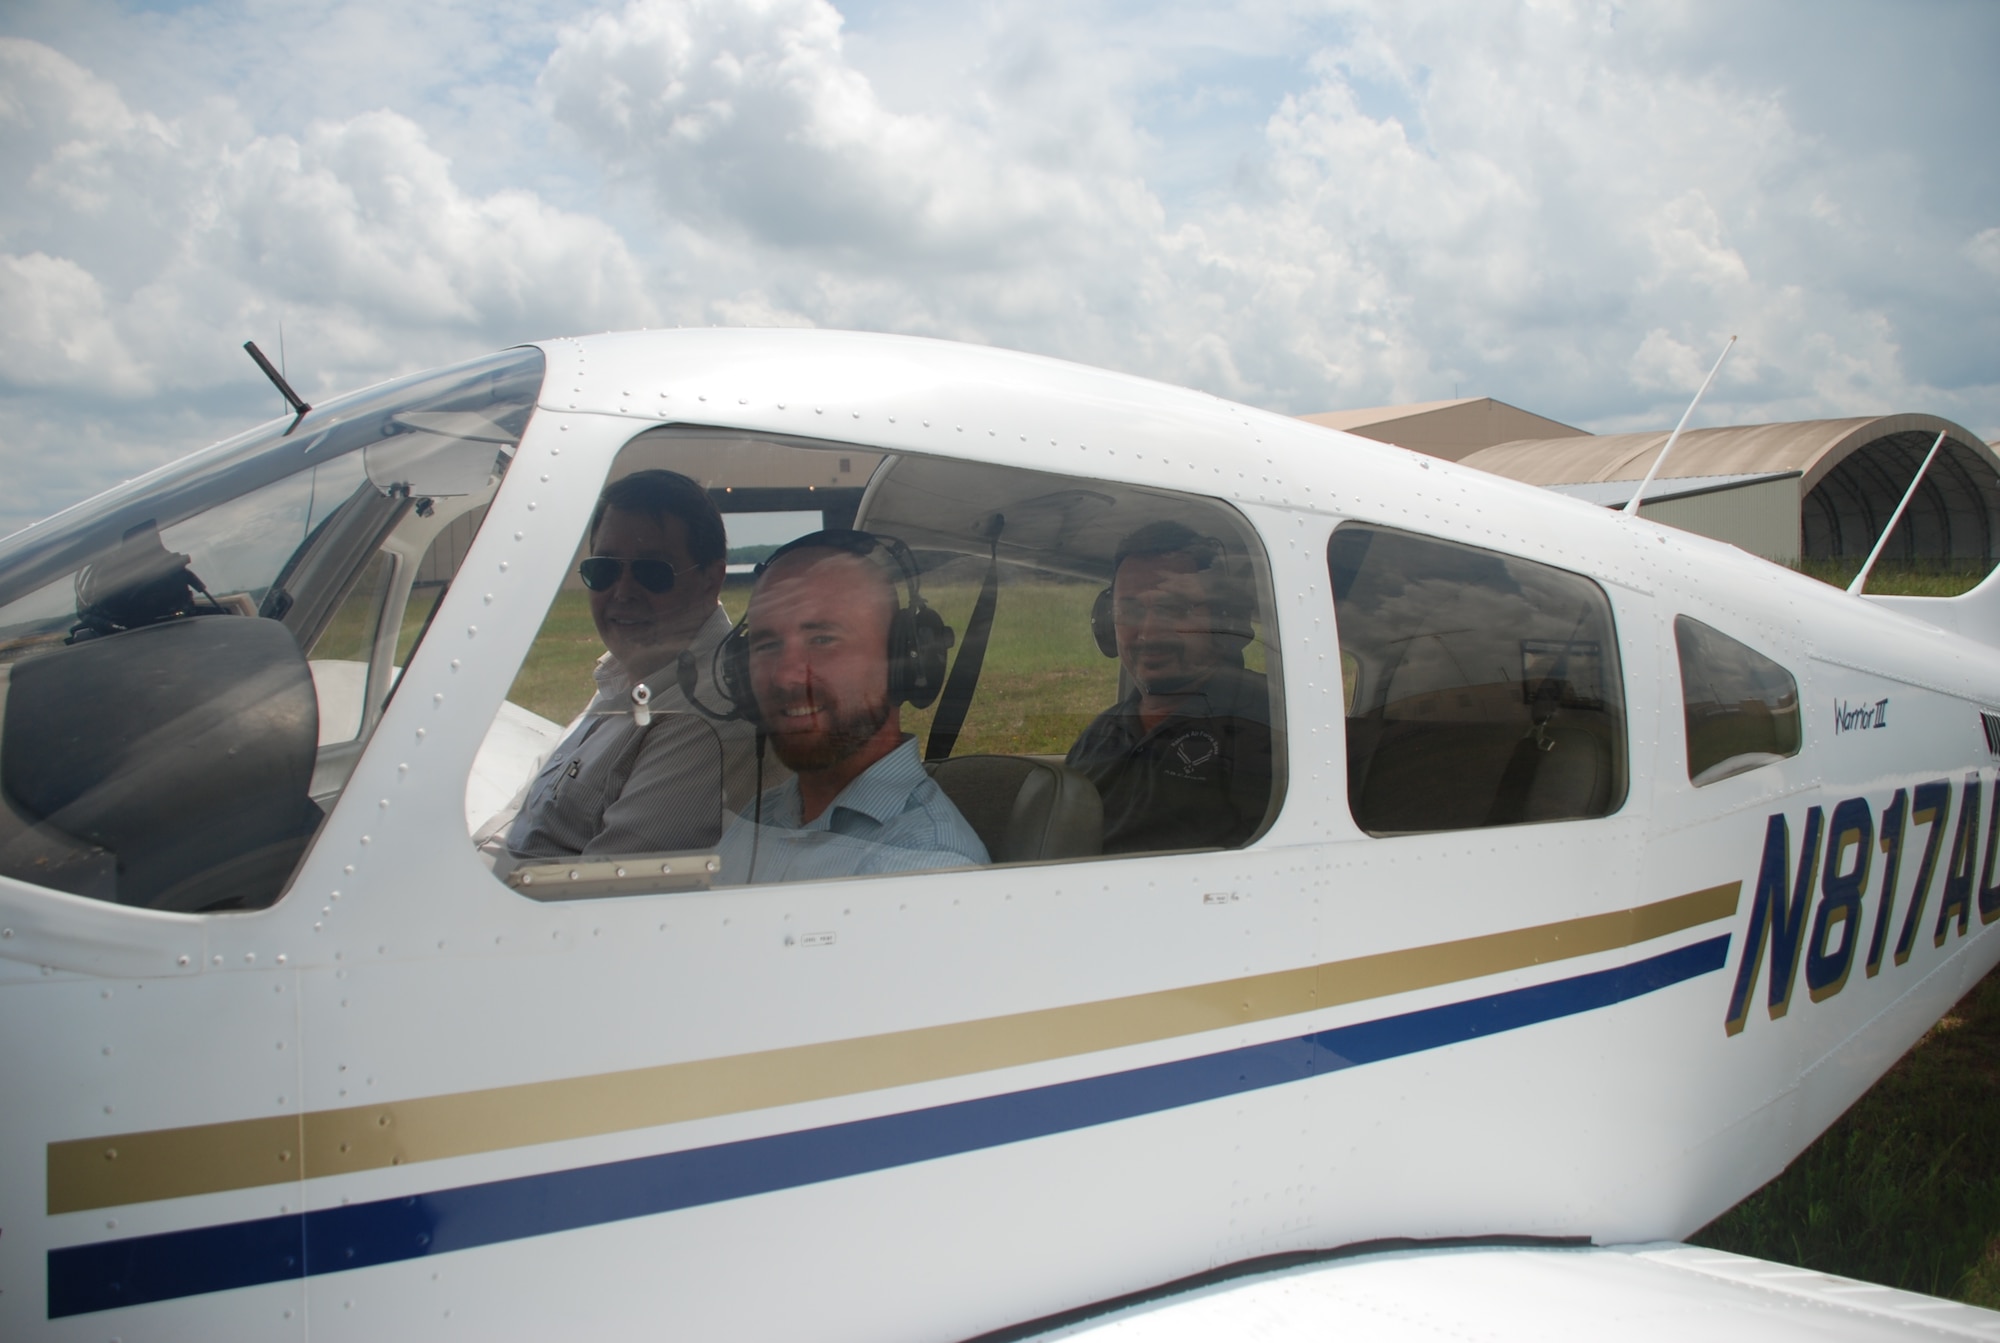 Brian Shreve, Rev-Up reporter, sits in a Piper Warrior III along with Lewayne Davis, Robins Aero Club chief flight instructor (left) and Paul Wenzel, Robins Public Affairs chief videographer (in the back seat), prior to take off. The Robins Aero Club was once limited to active duty personnel and Department of Defense civilians. On-base
flying lessons are now available to all Middle Georgia residents following a recent partnership between the club and the local community. Base and local residents interested in signing up for flying lessons at the Robins Aero Club should call (478) 926-4867.